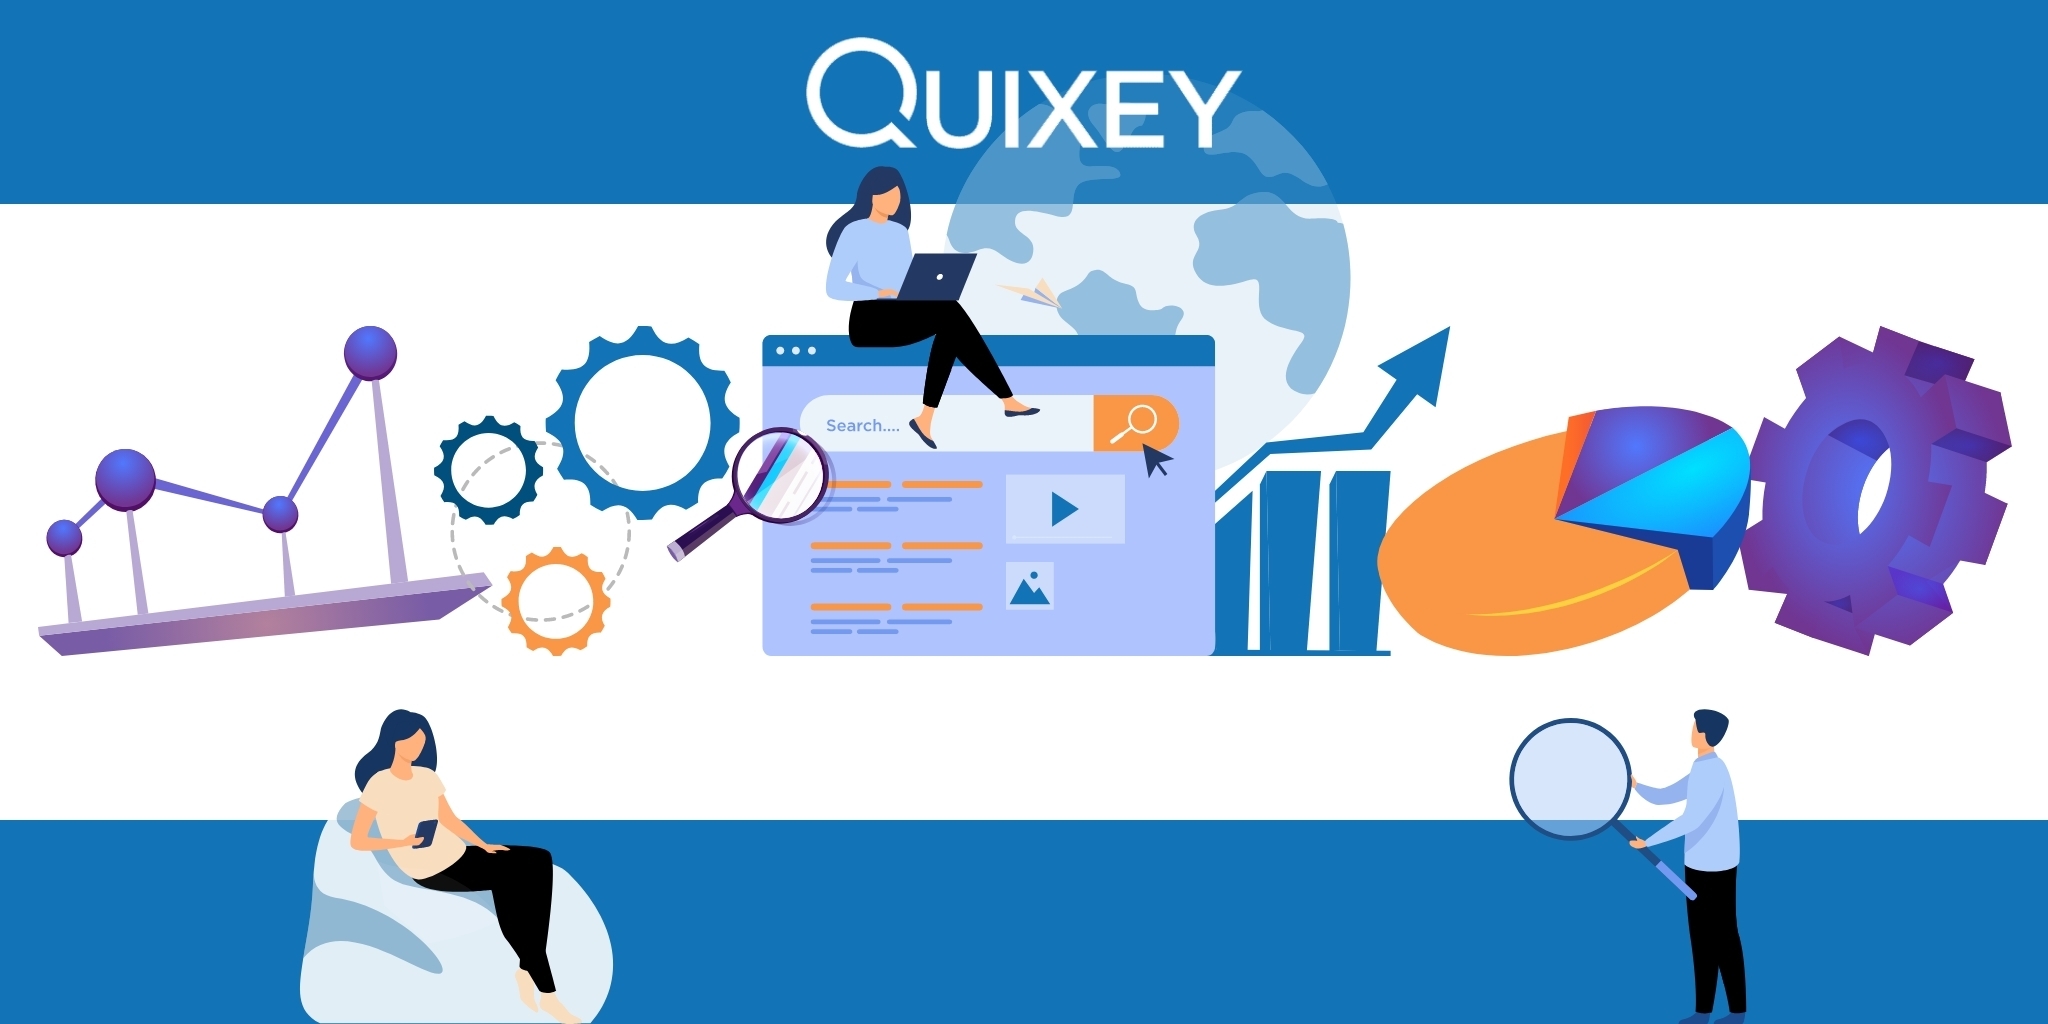 How Quixey Search Engine Fails To Become A Successful App